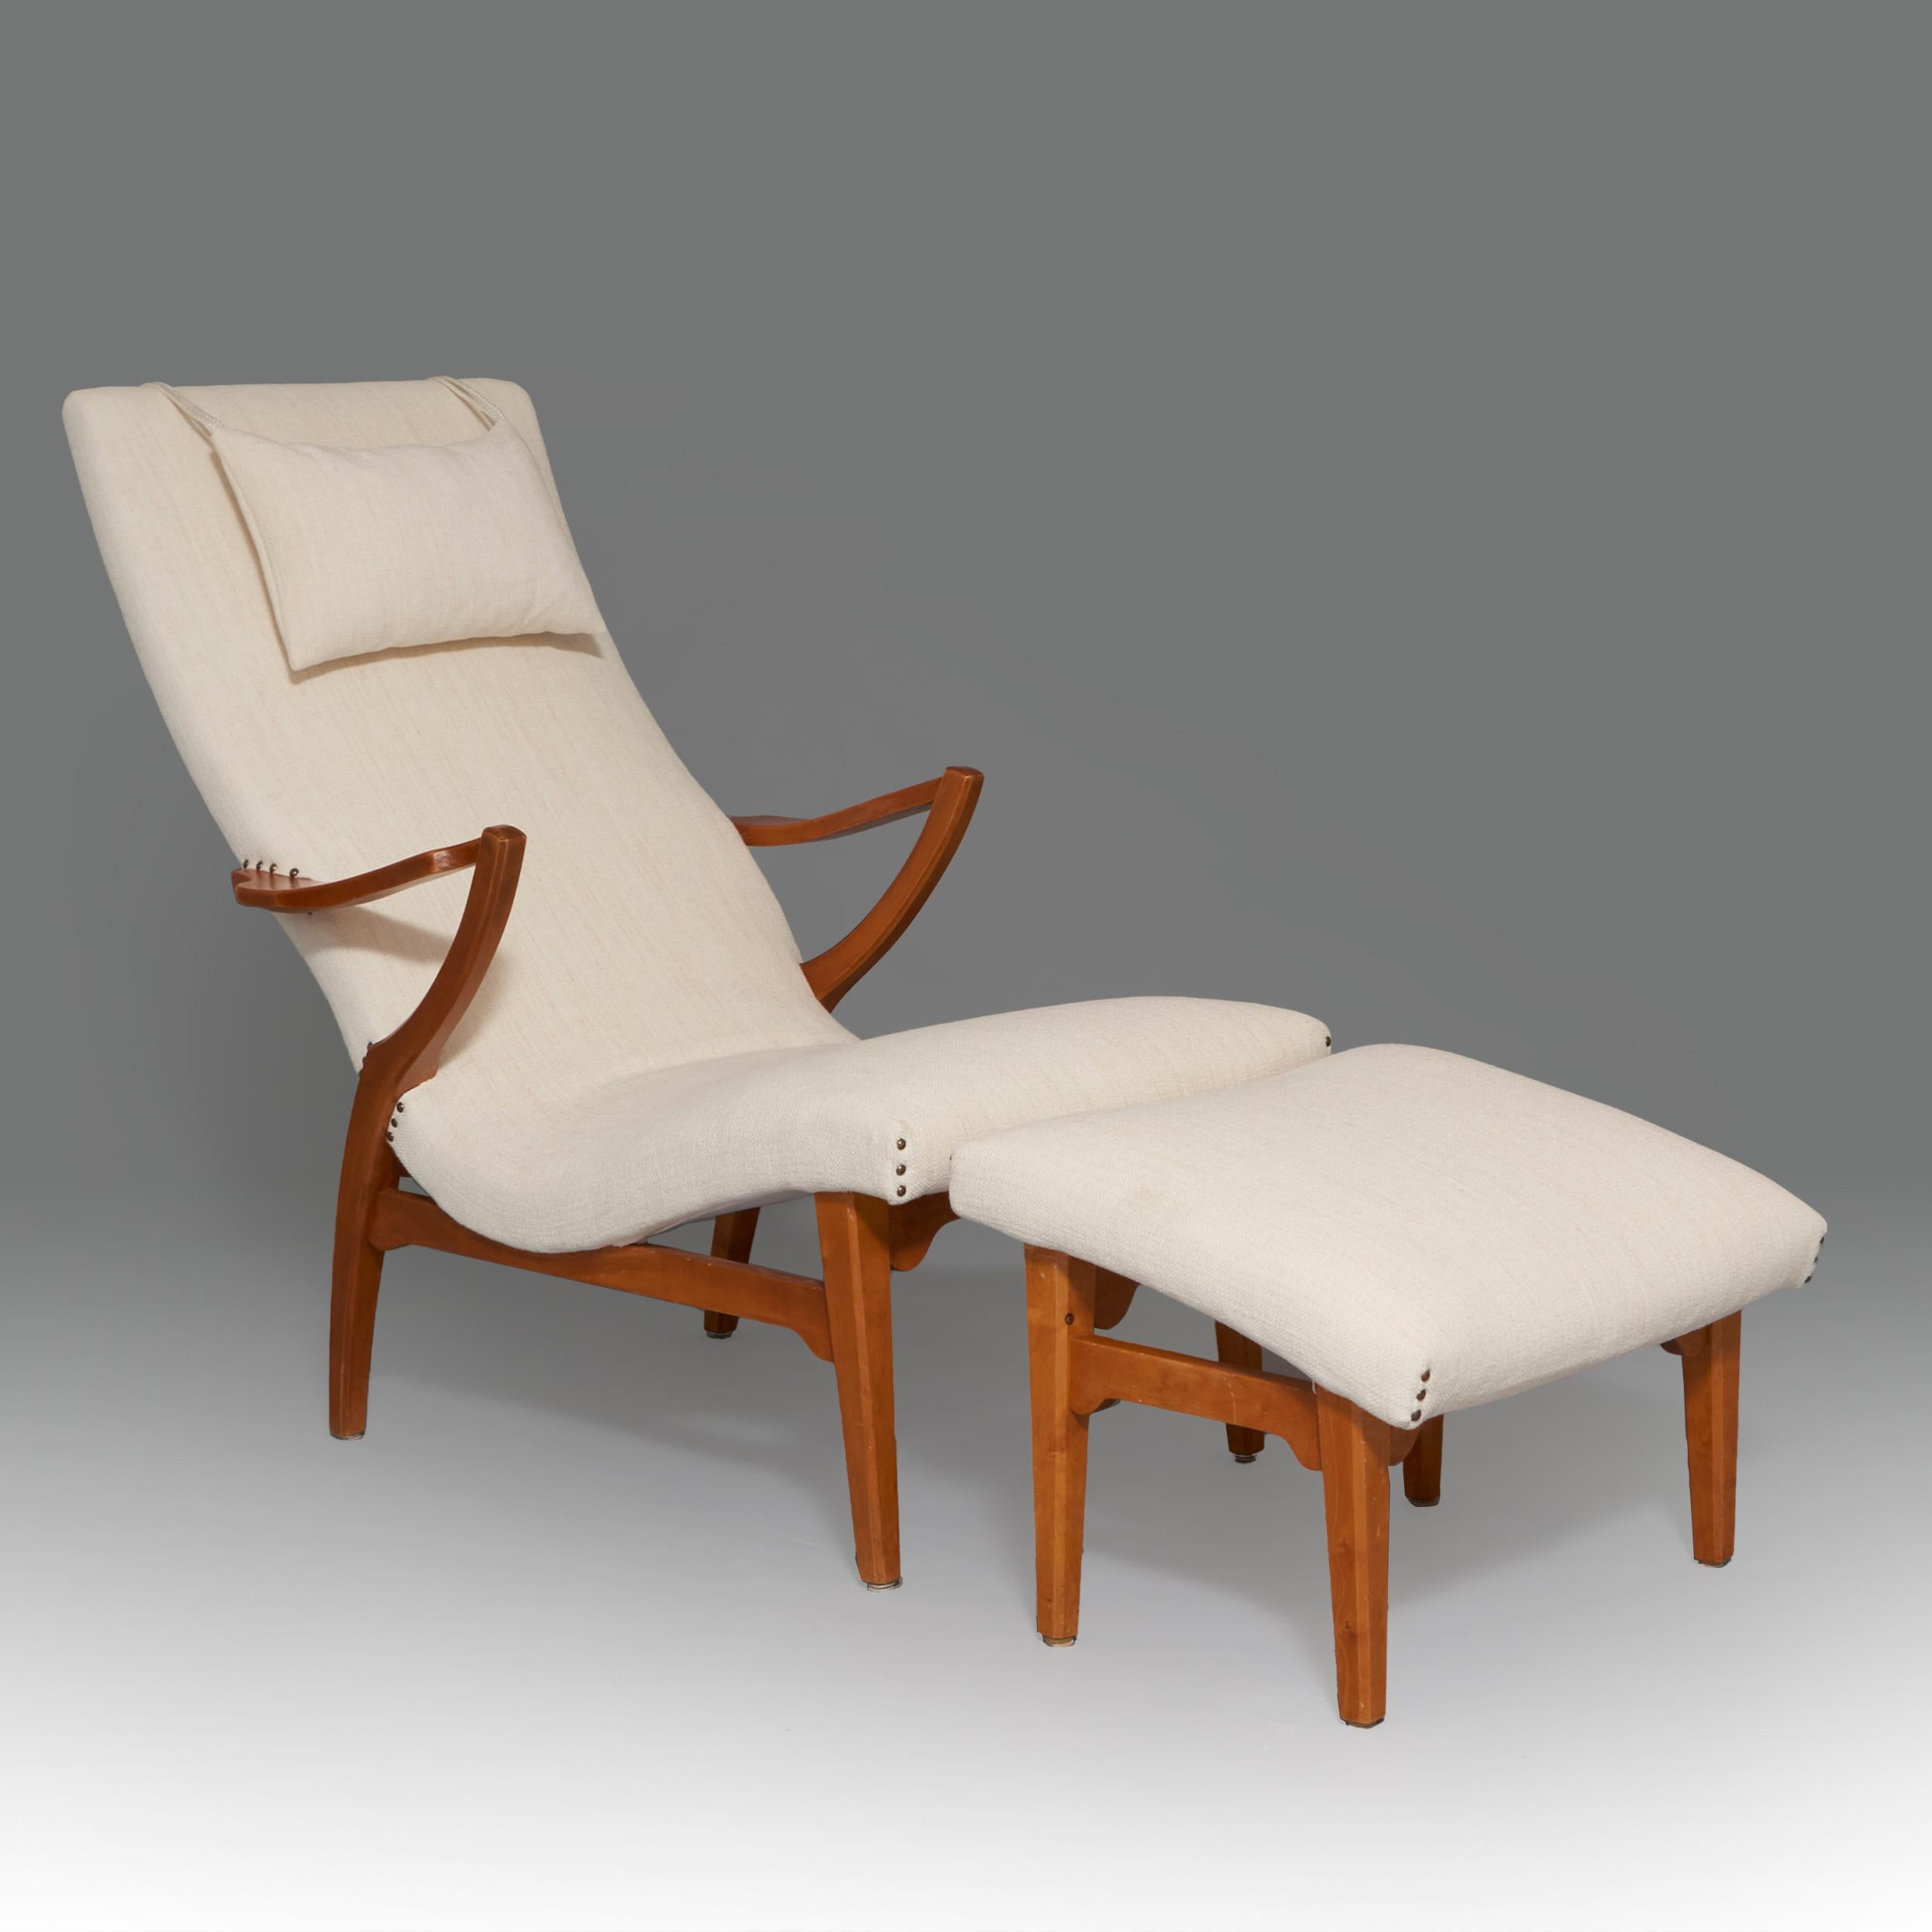 Armchair and ottoman designed by Axel Larsson in upholstery and hard wood. Sweden, 1940’s

Axel Larsson was a Swedish interior and furniture designer who worked for Svenska Möbelfabrikerna, Bodafors (SMF) for the main part of his career. Several